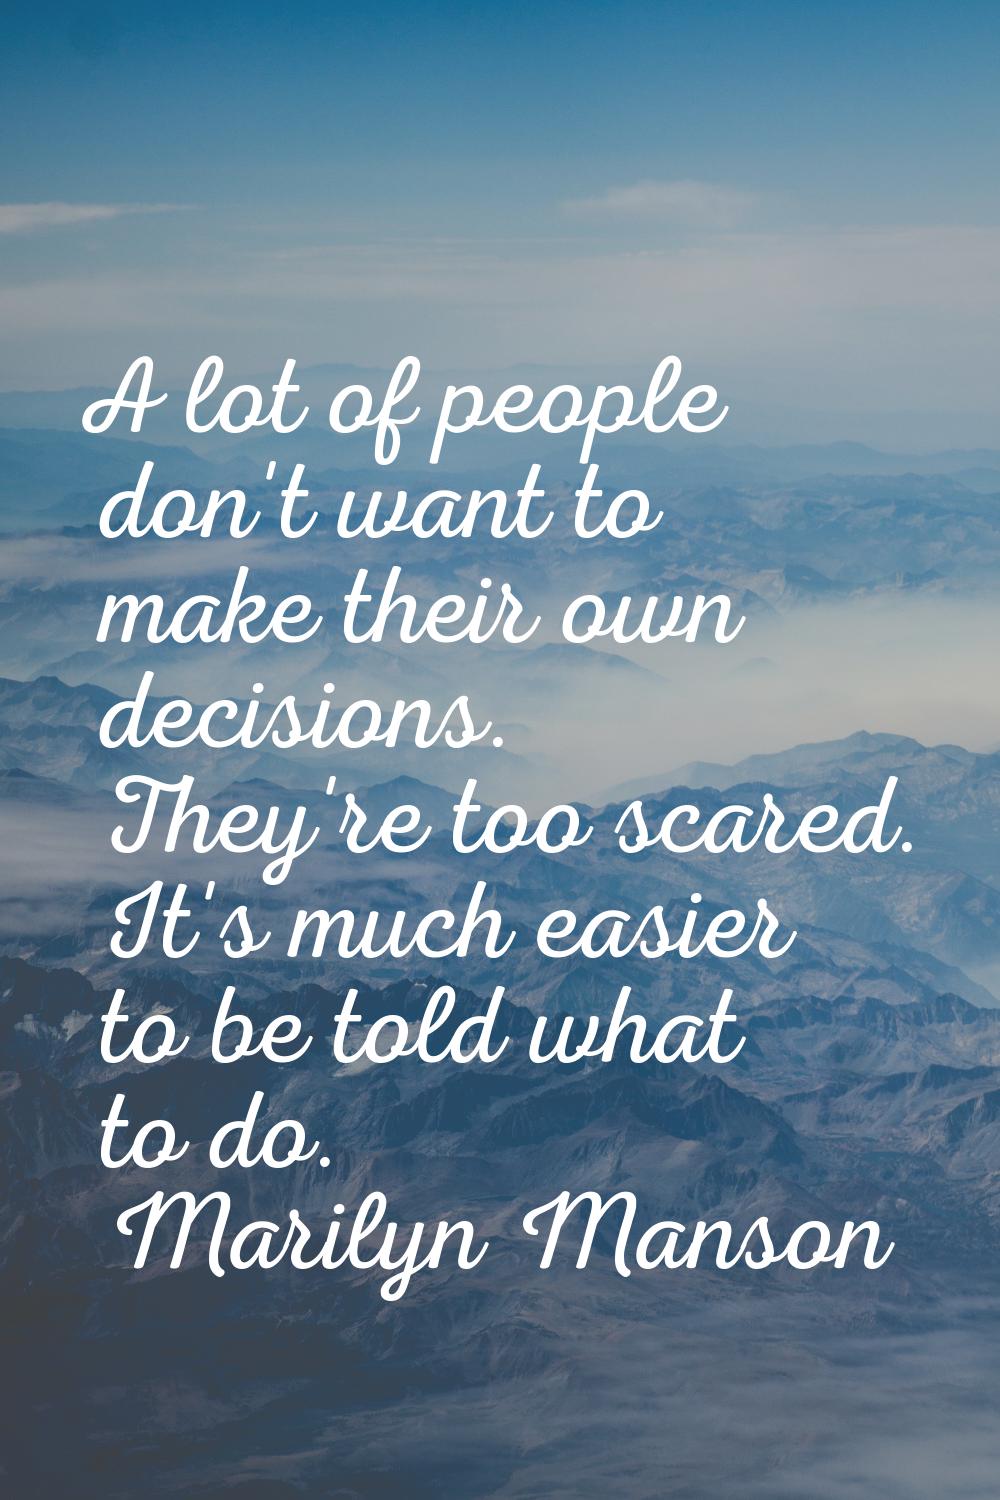 A lot of people don't want to make their own decisions. They're too scared. It's much easier to be 